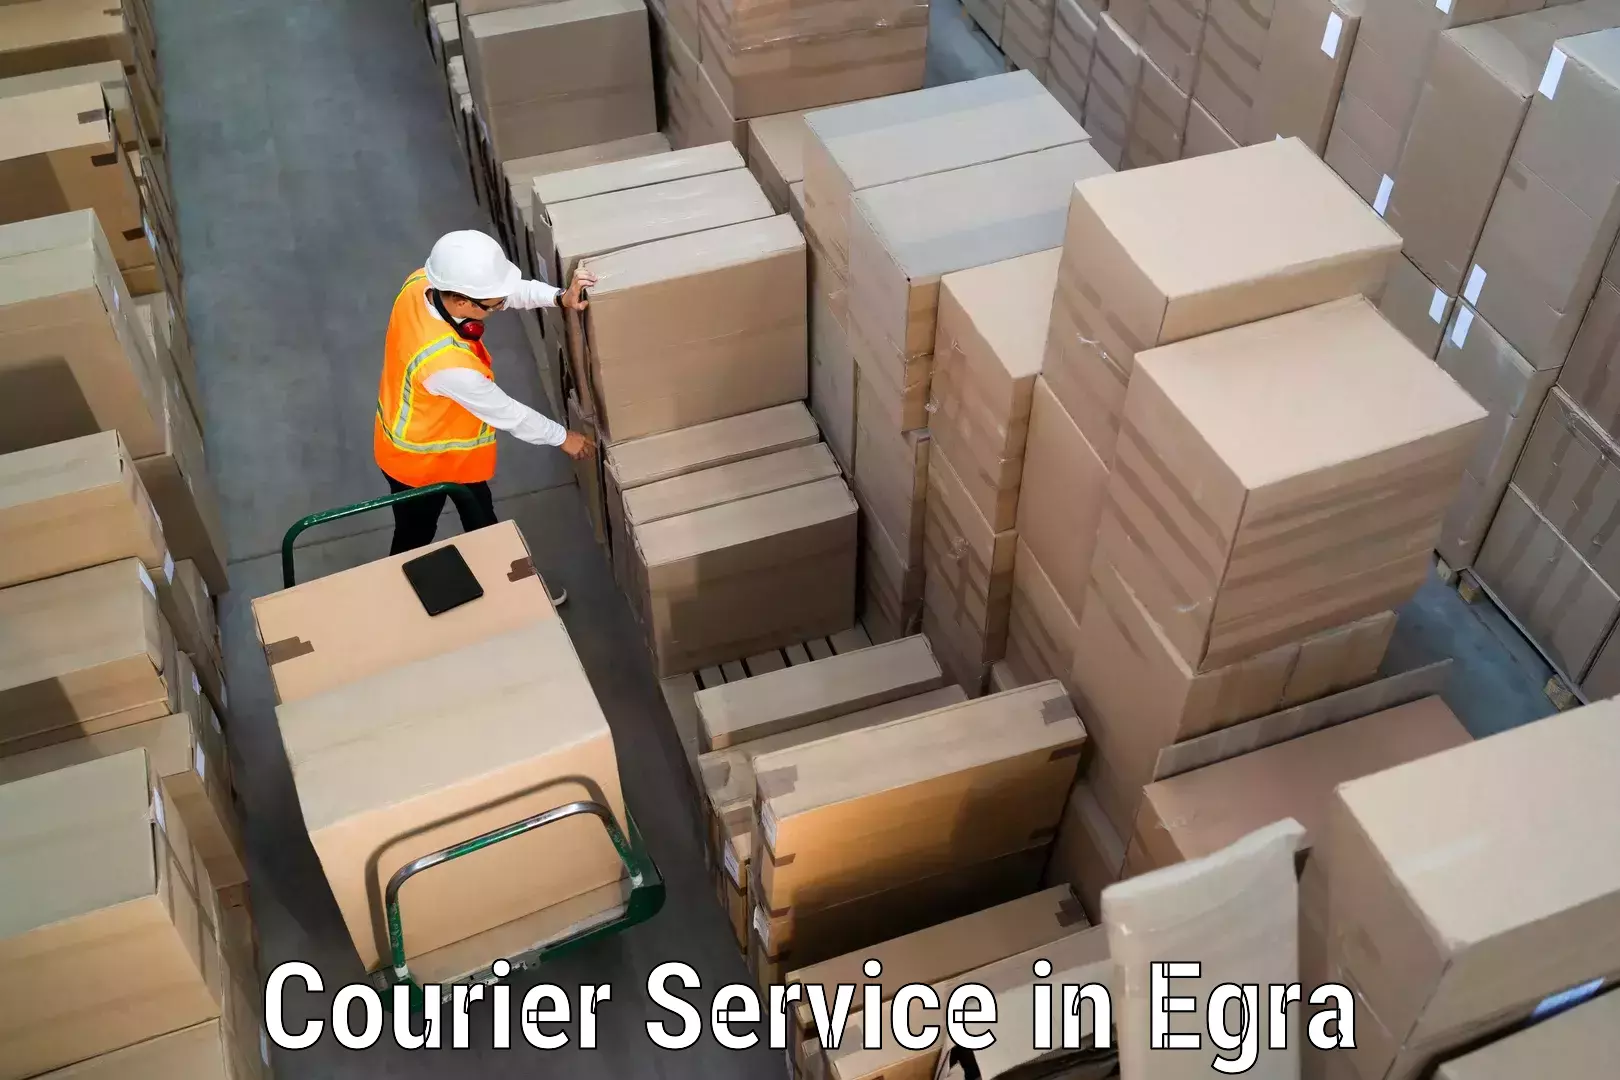 Reliable parcel services in Egra